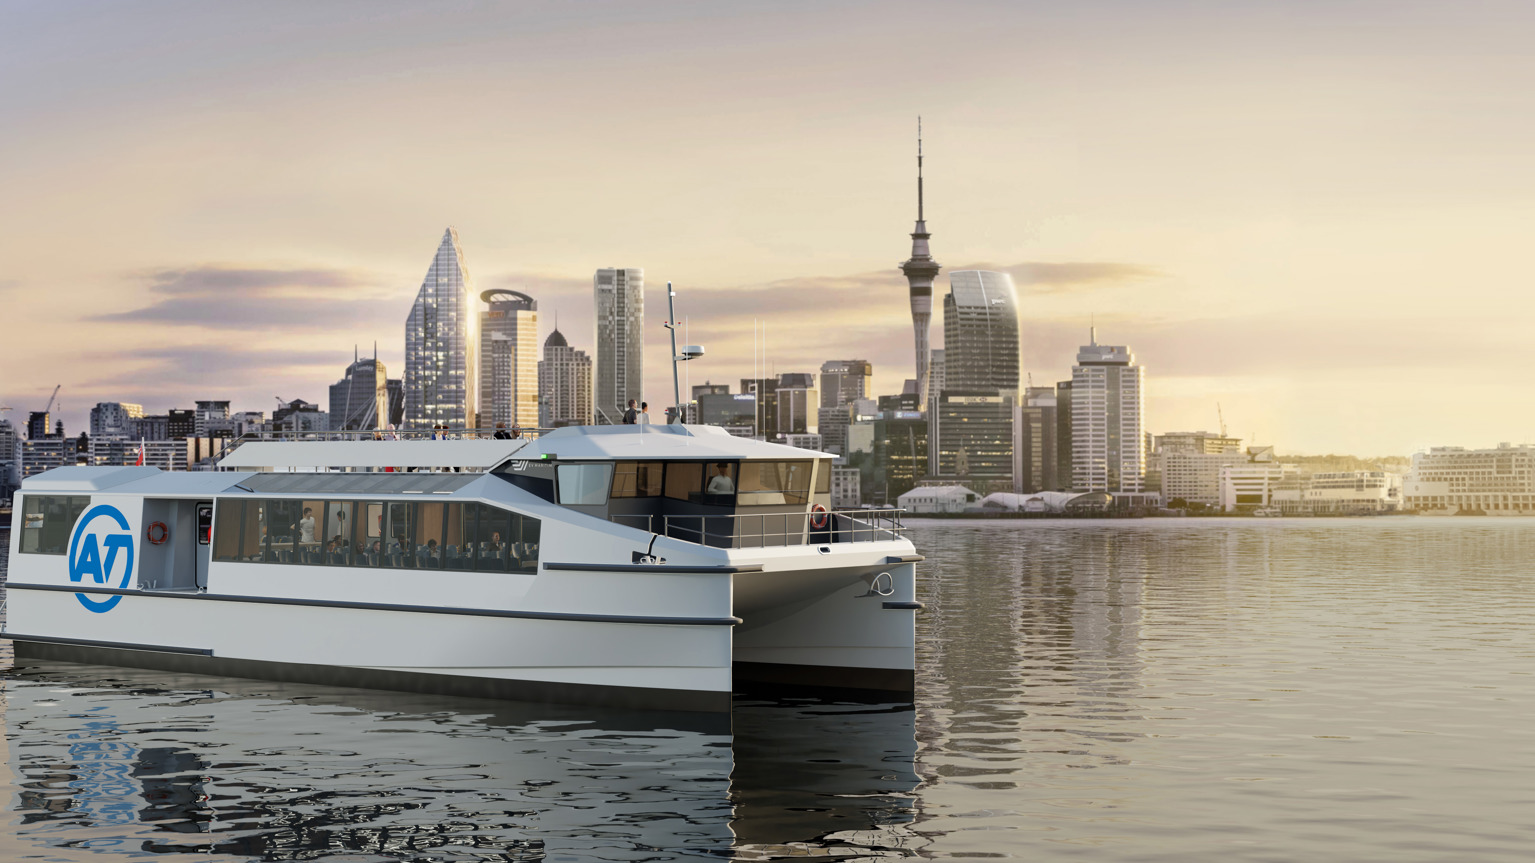 Image of electric ferry with AT logo sailing past the Auckland city landscape, including Sky Tower